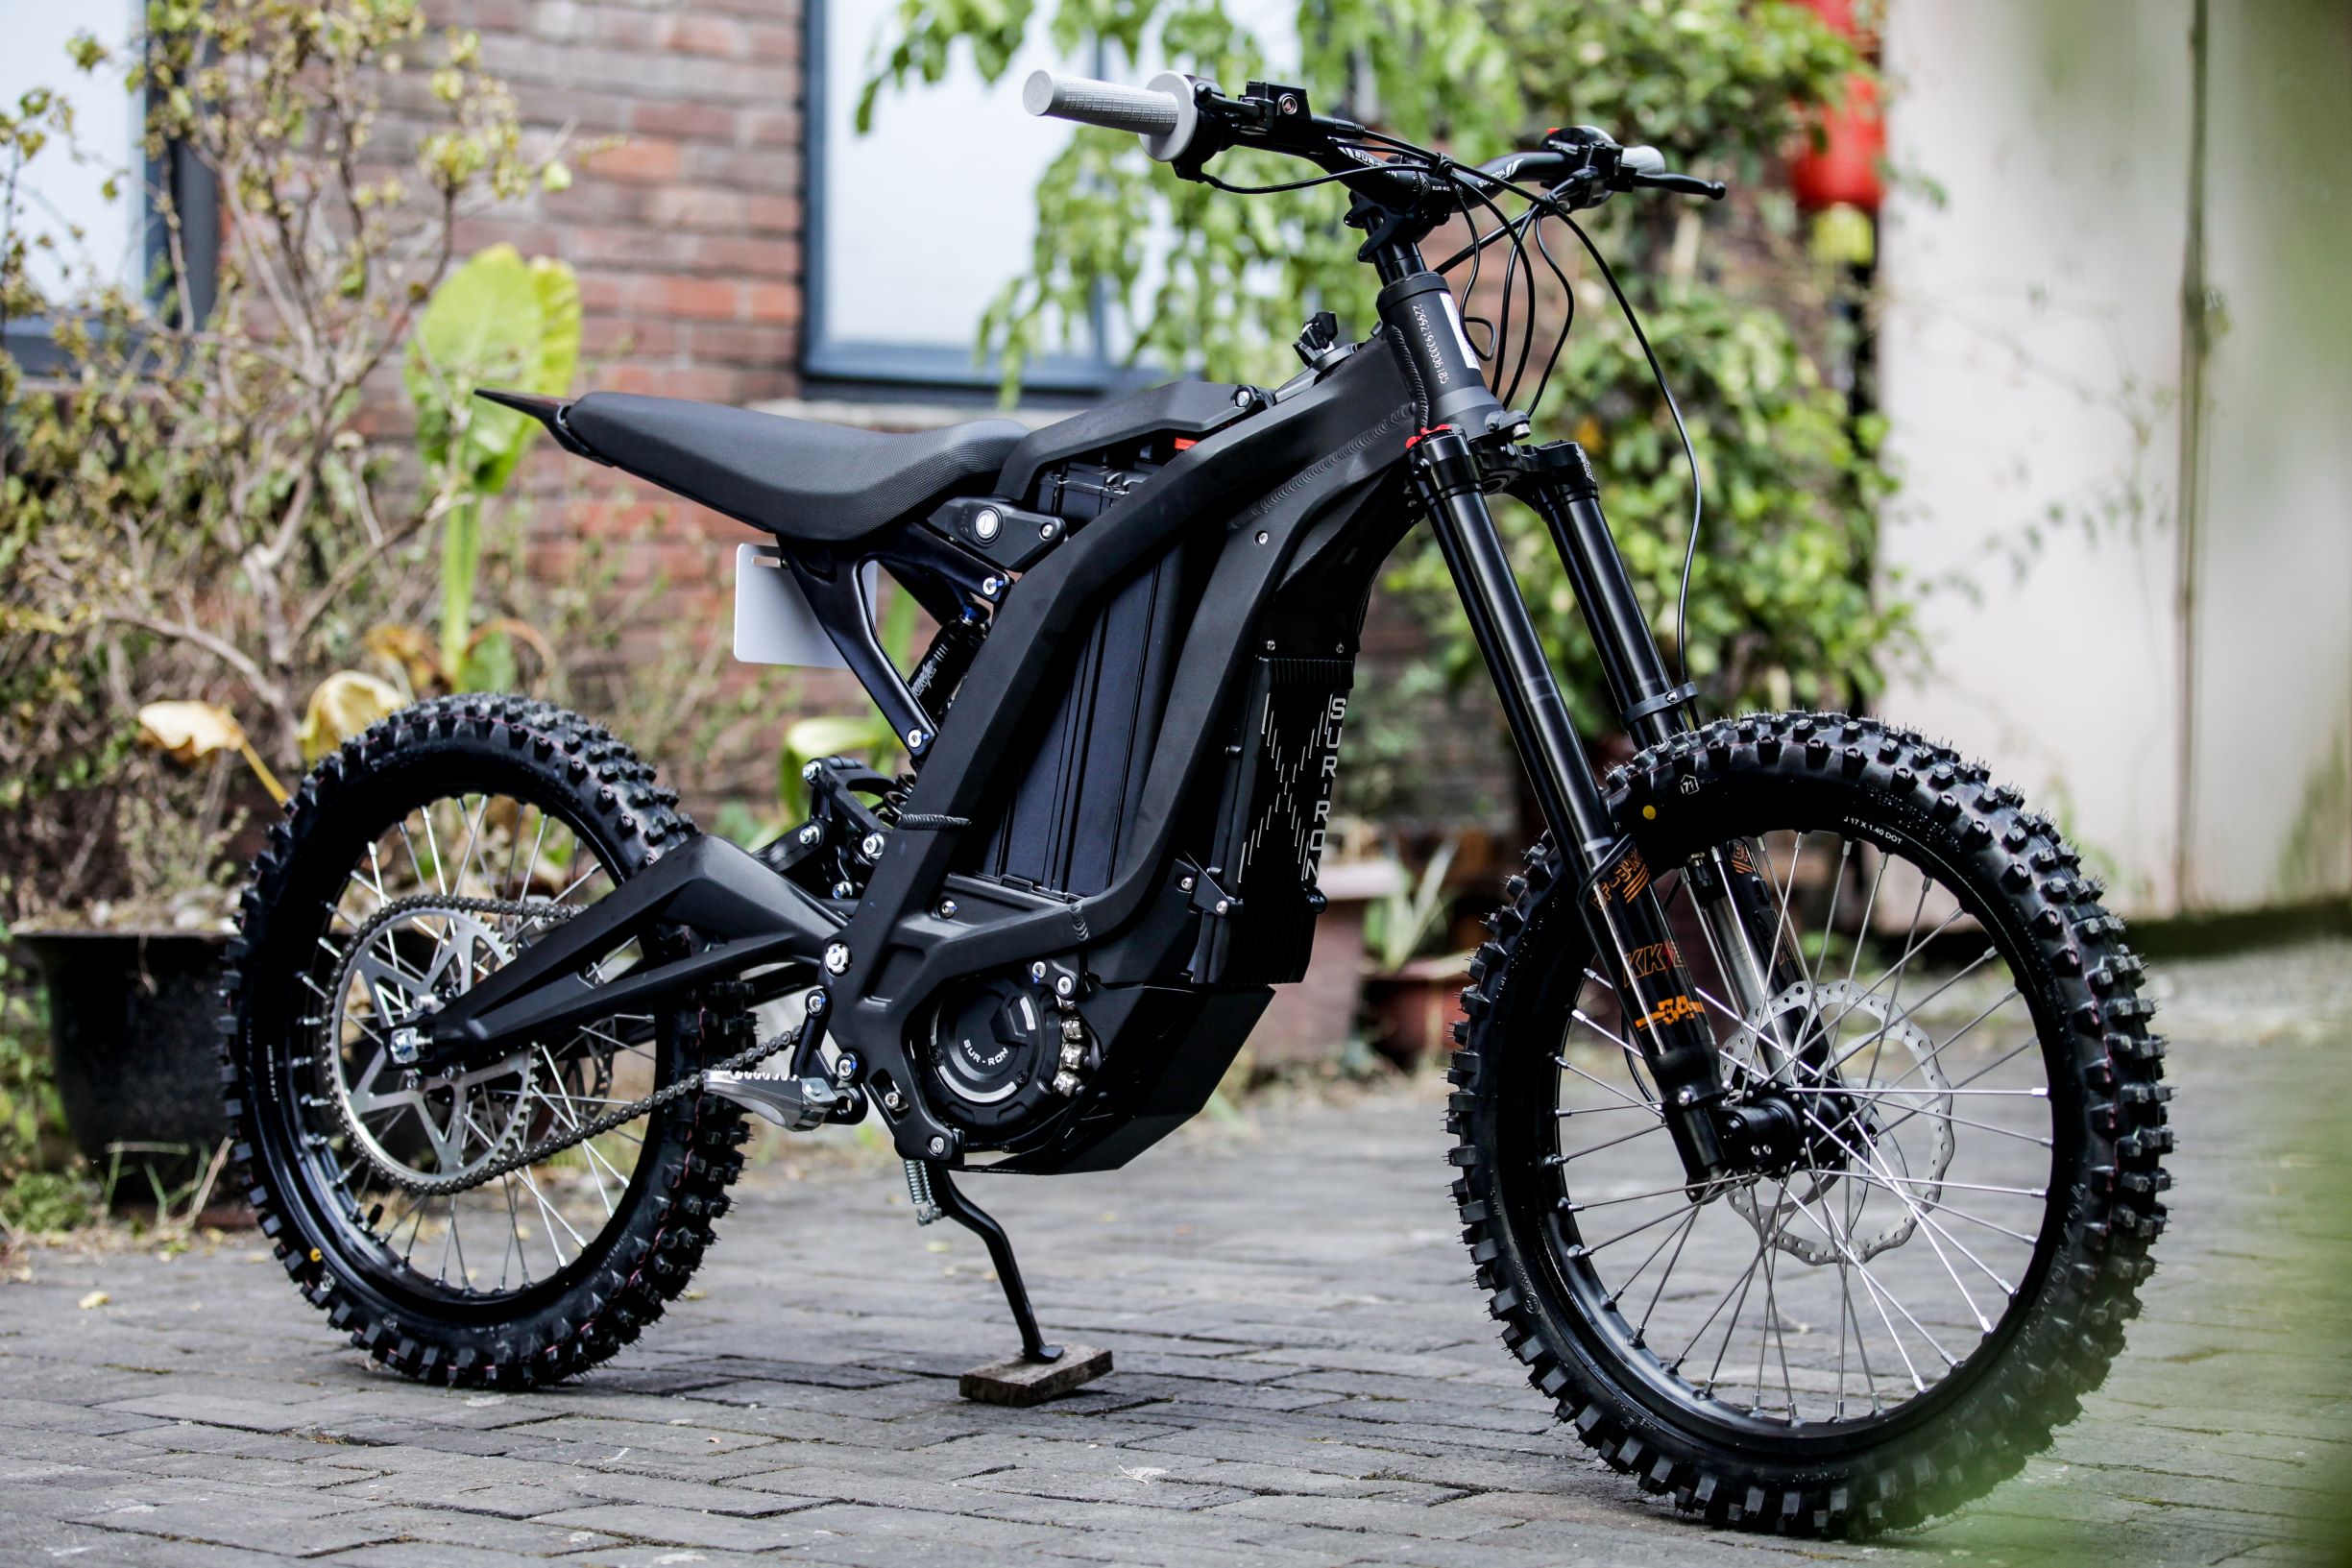 SurRon To Exclusively Launch Brand New Youth Bike at International